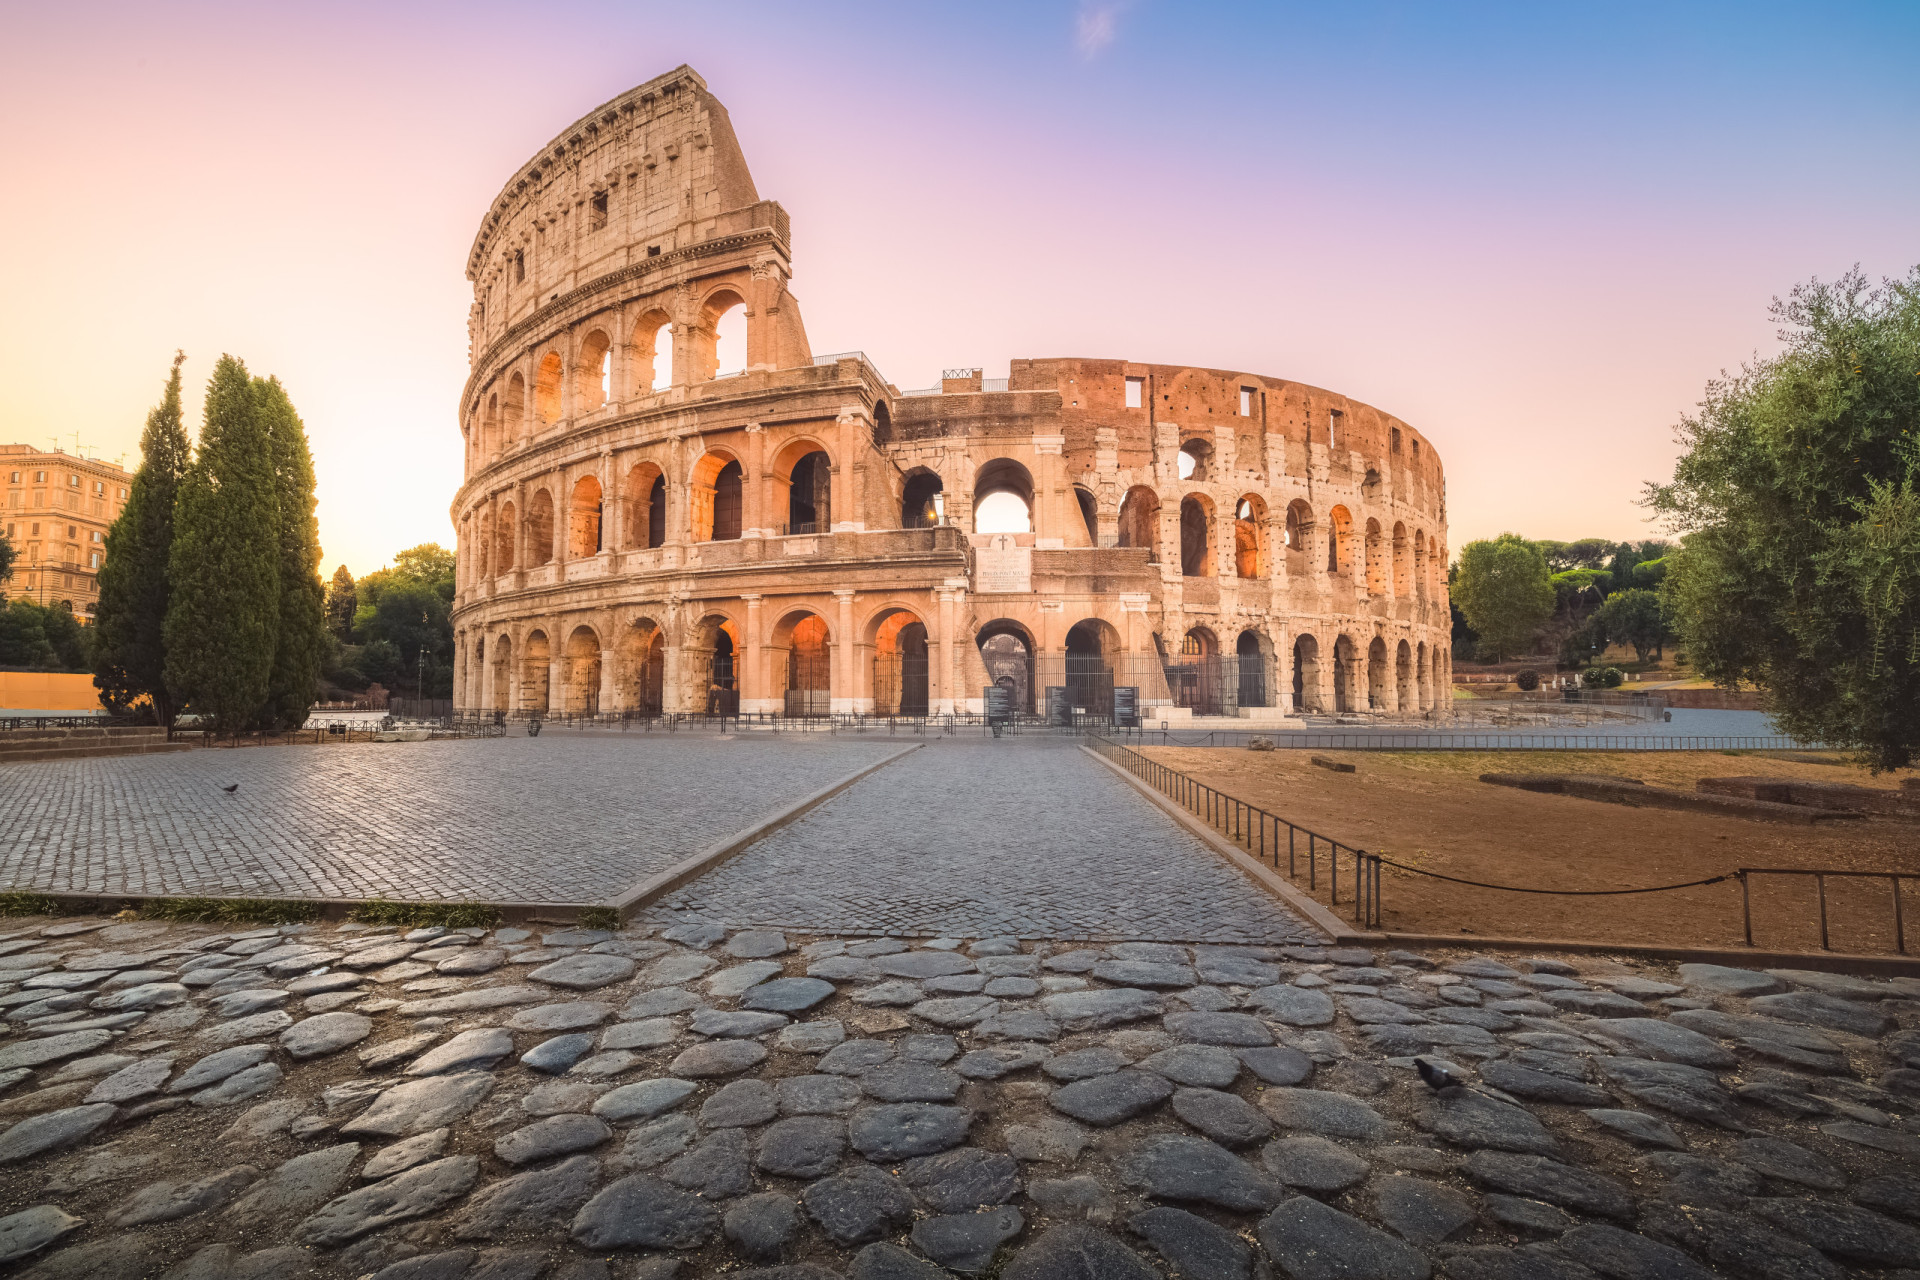 <p>The Colosseum is one of Europe's heavily pickpocketed hot spots, attracting over four million people per year.</p><p><a href="https://www.msn.com/en-us/community/channel/vid-7xx8mnucu55yw63we9va2gwr7uihbxwc68fxqp25x6tg4ftibpra?cvid=94631541bc0f4f89bfd59158d696ad7e">Follow us and access great exclusive content every day</a></p>